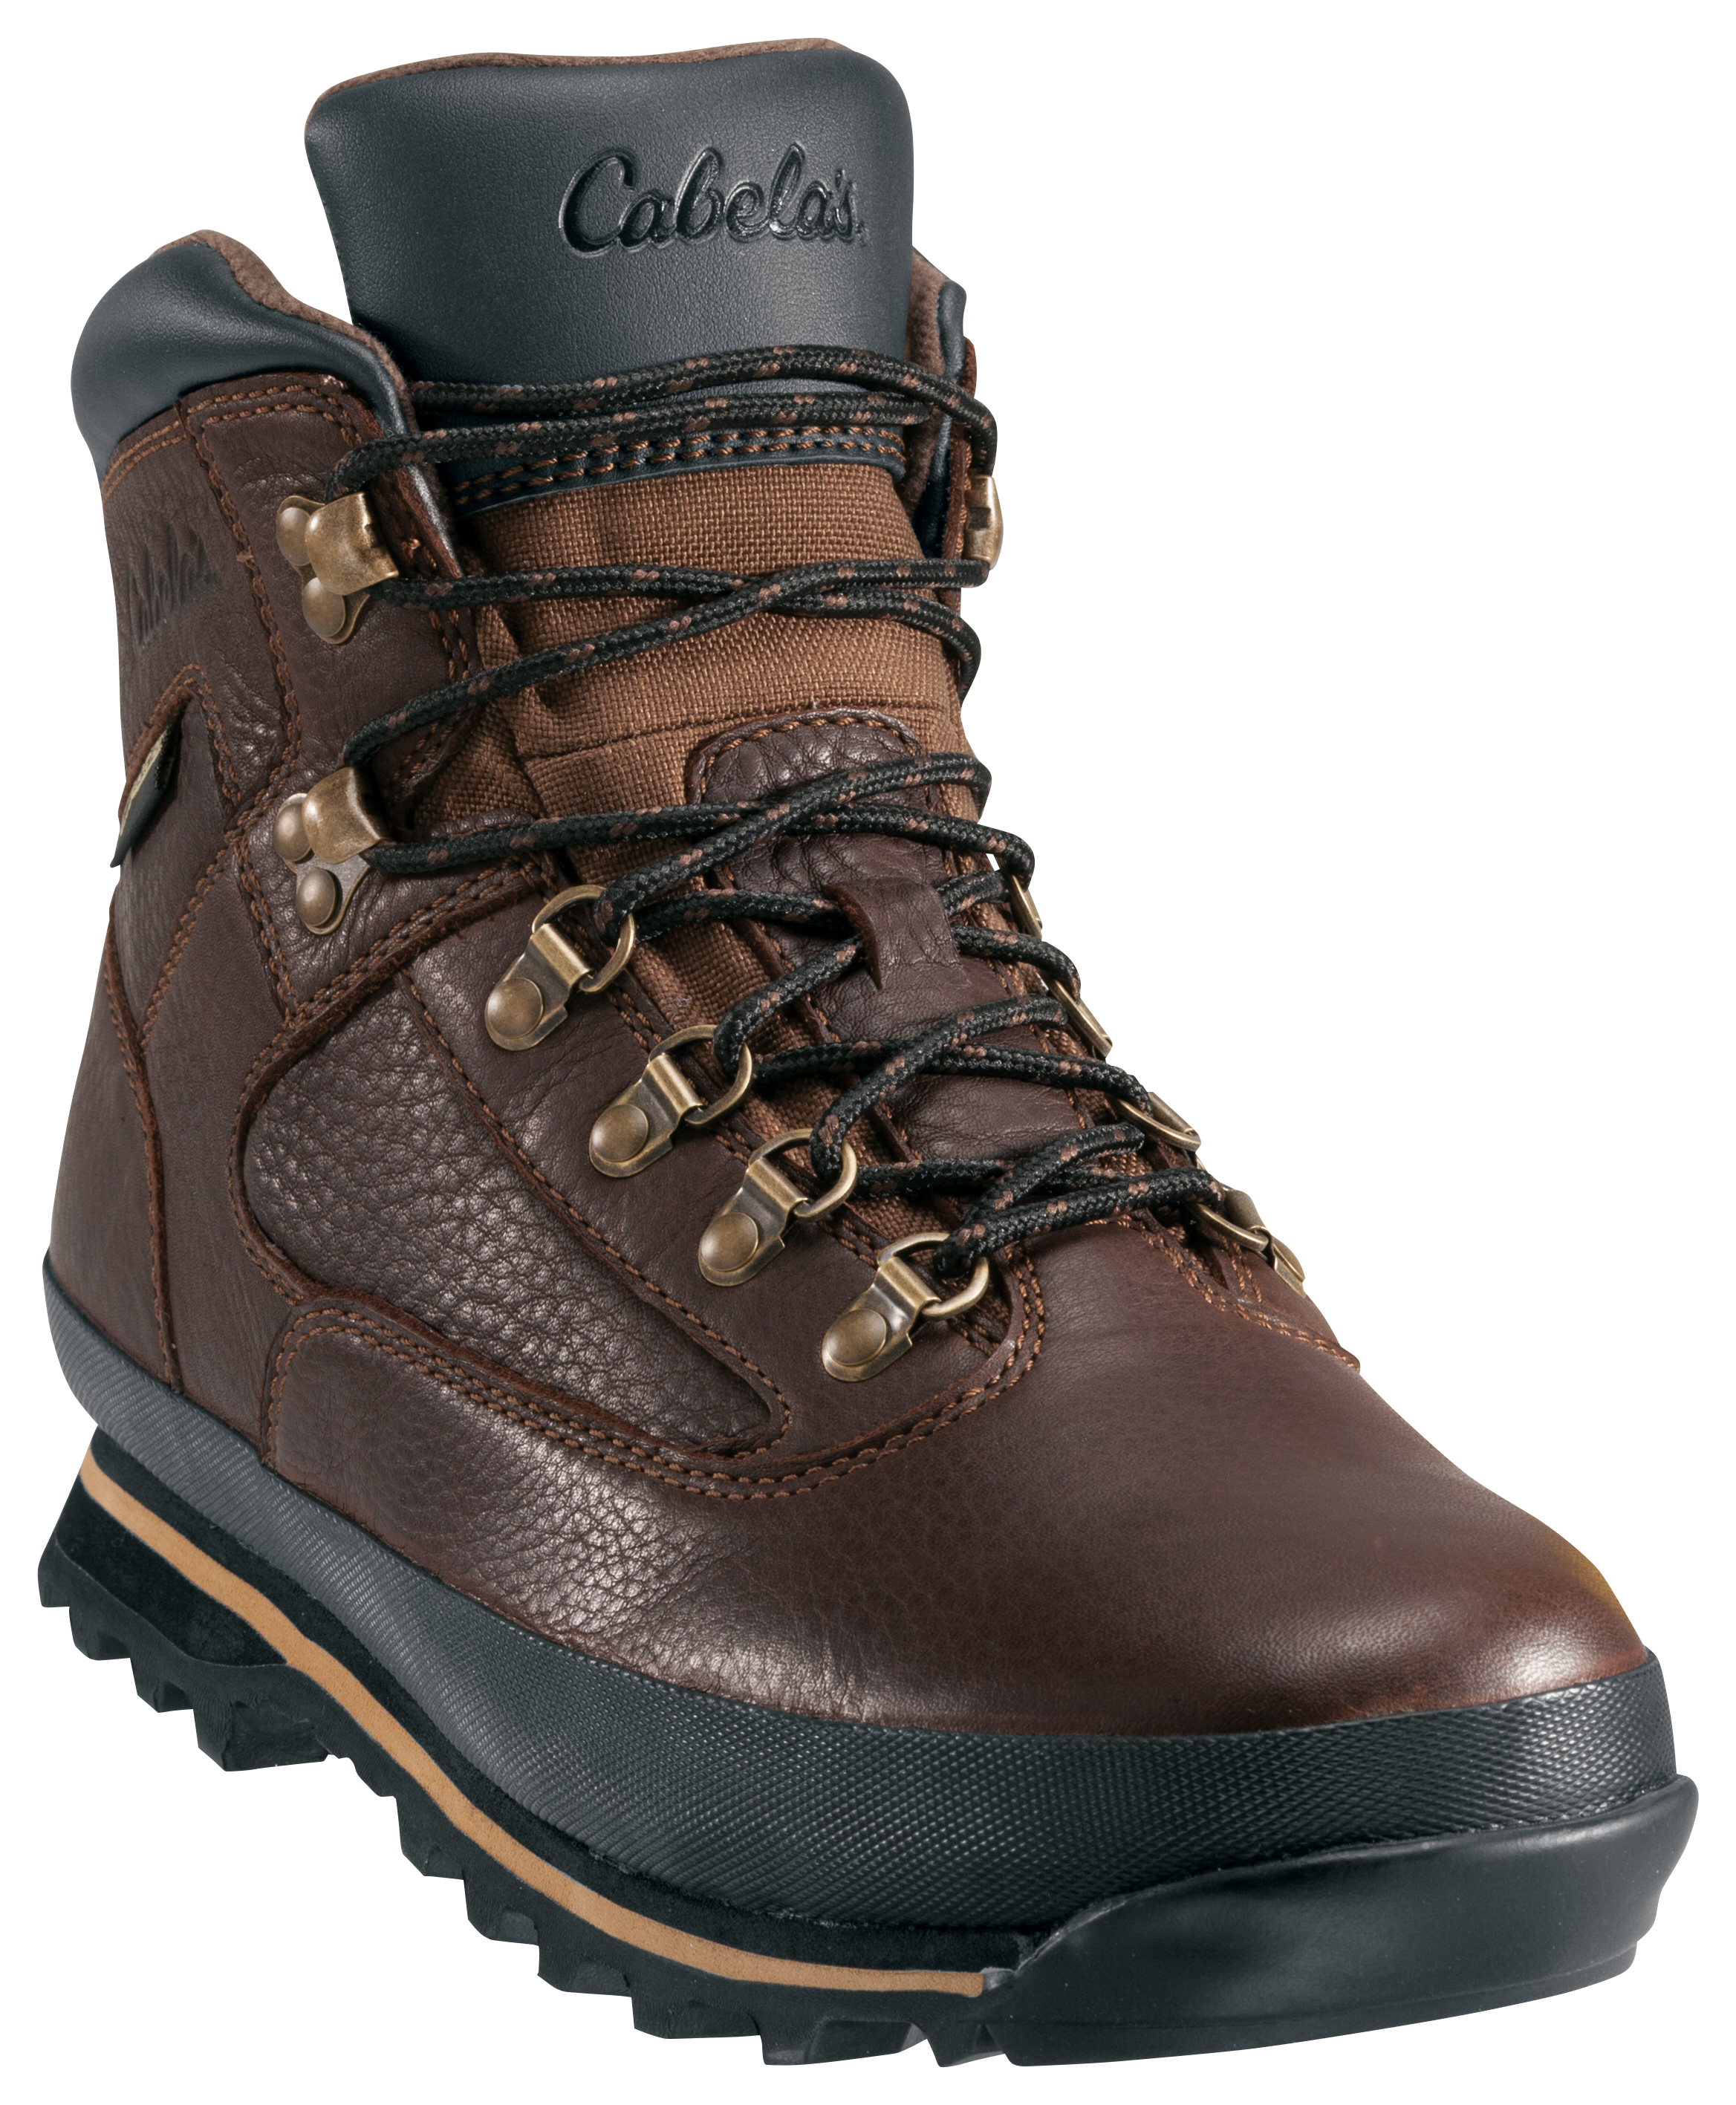 Cabela's Rimrock Mid GORE-TEX Hiking Boots for Men - Brown - 8M